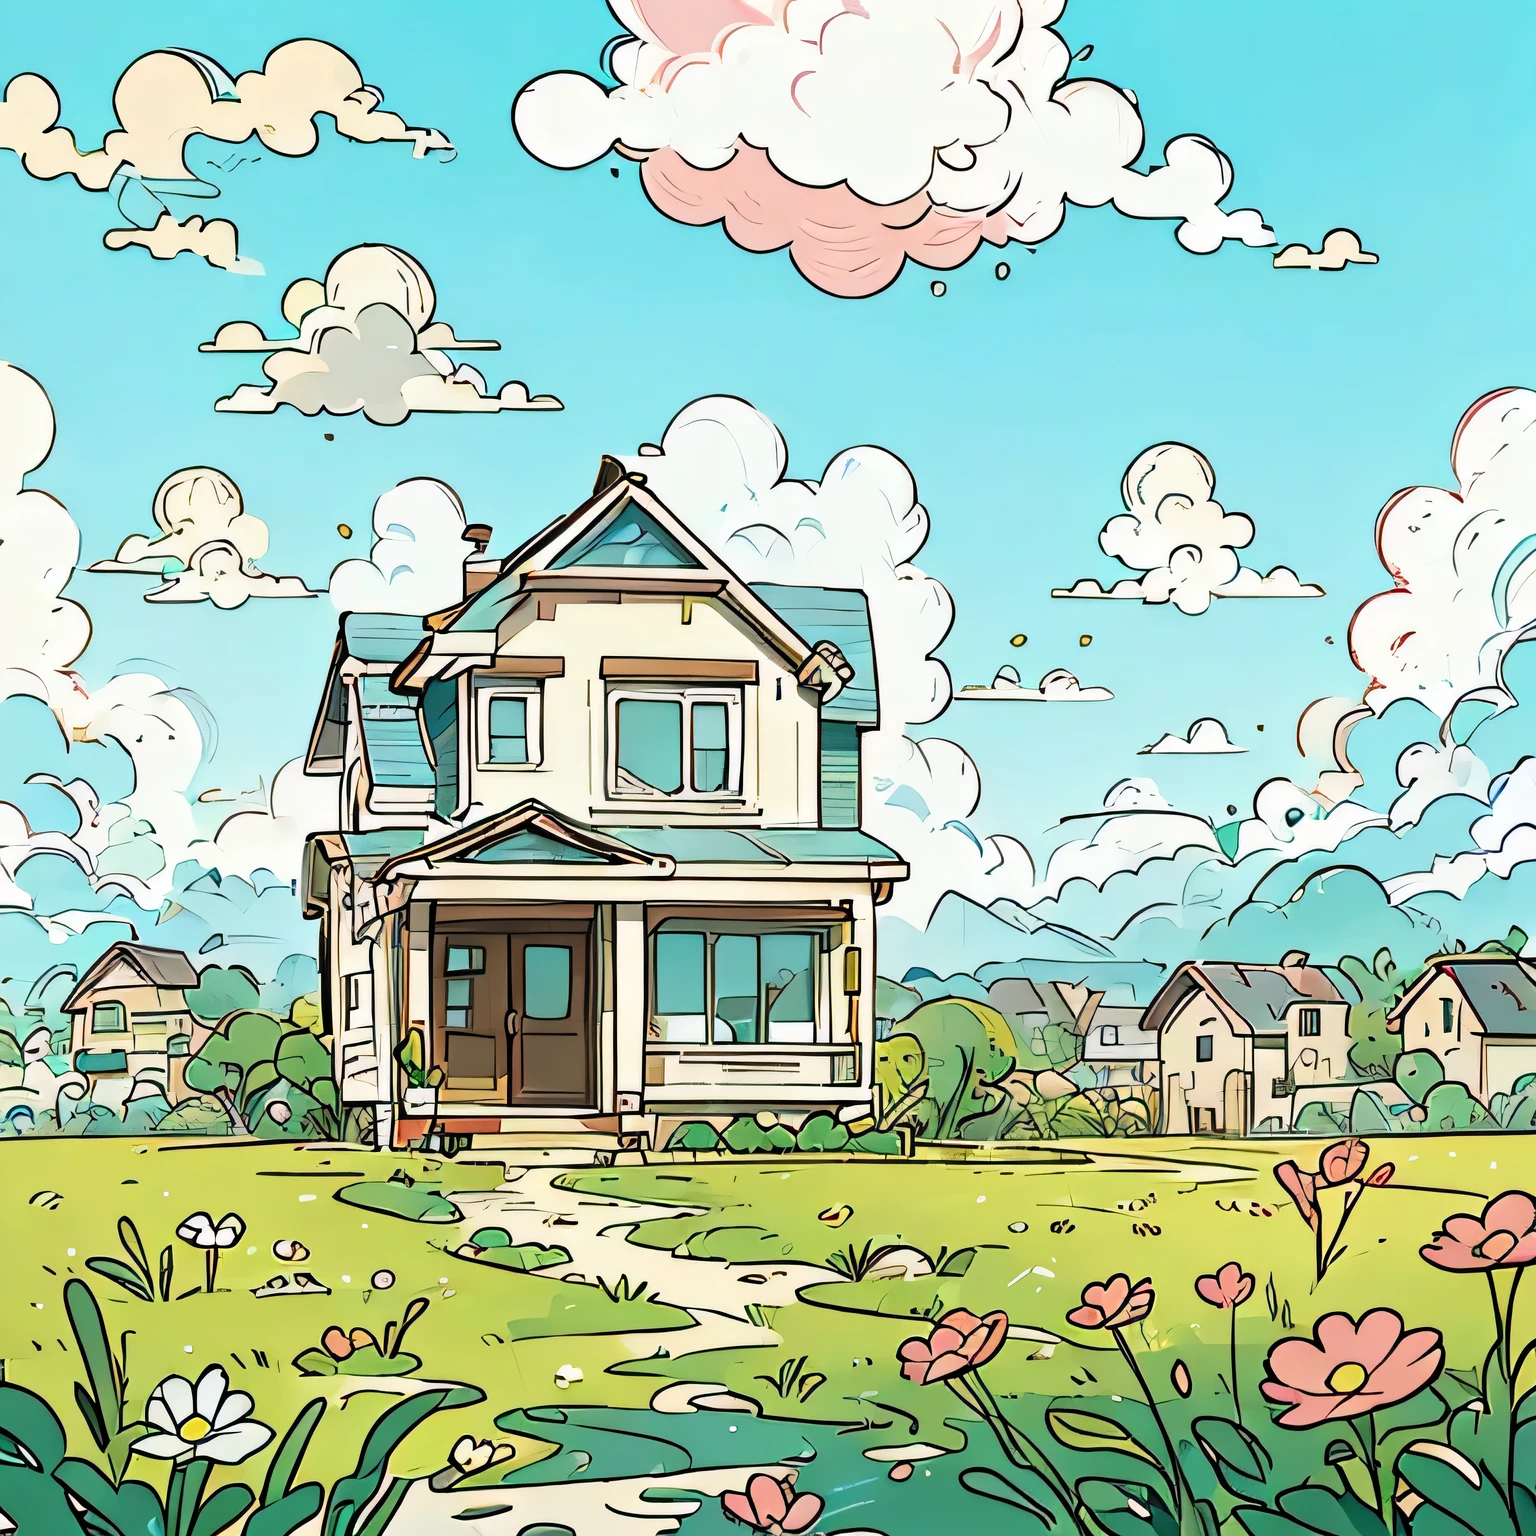 flower，Sky，house，grassland，
Soft warm tones，
Smooth lines，
Simple style，
unlimited color palette，
Flat anime style，